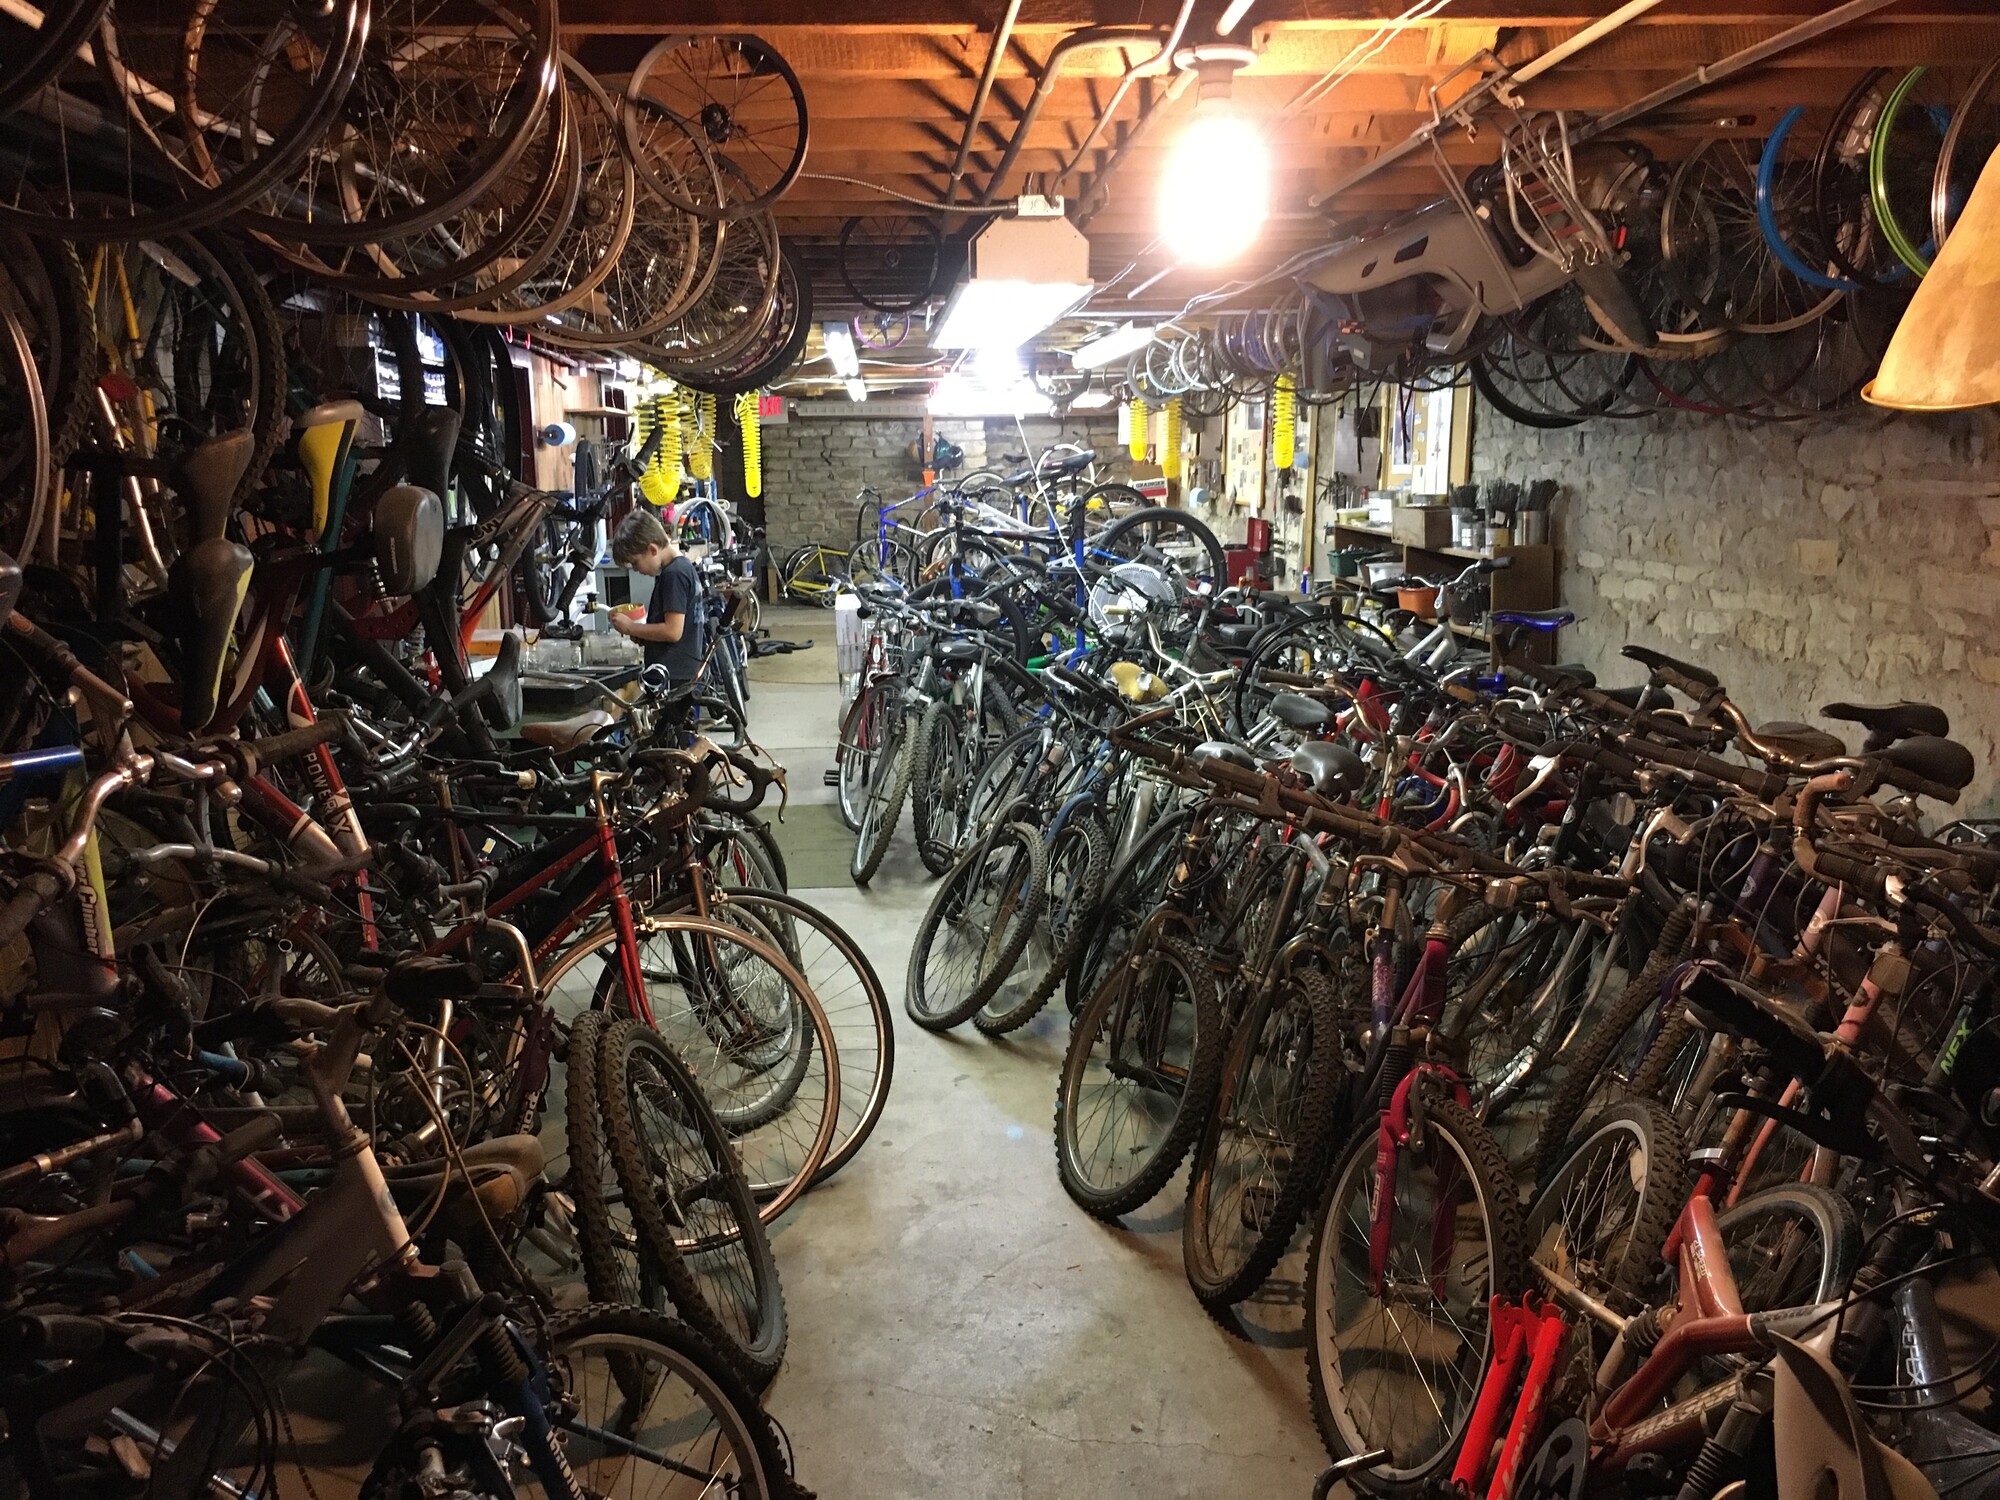 A storage room full of bikes. In the background, a kid works on a repair.